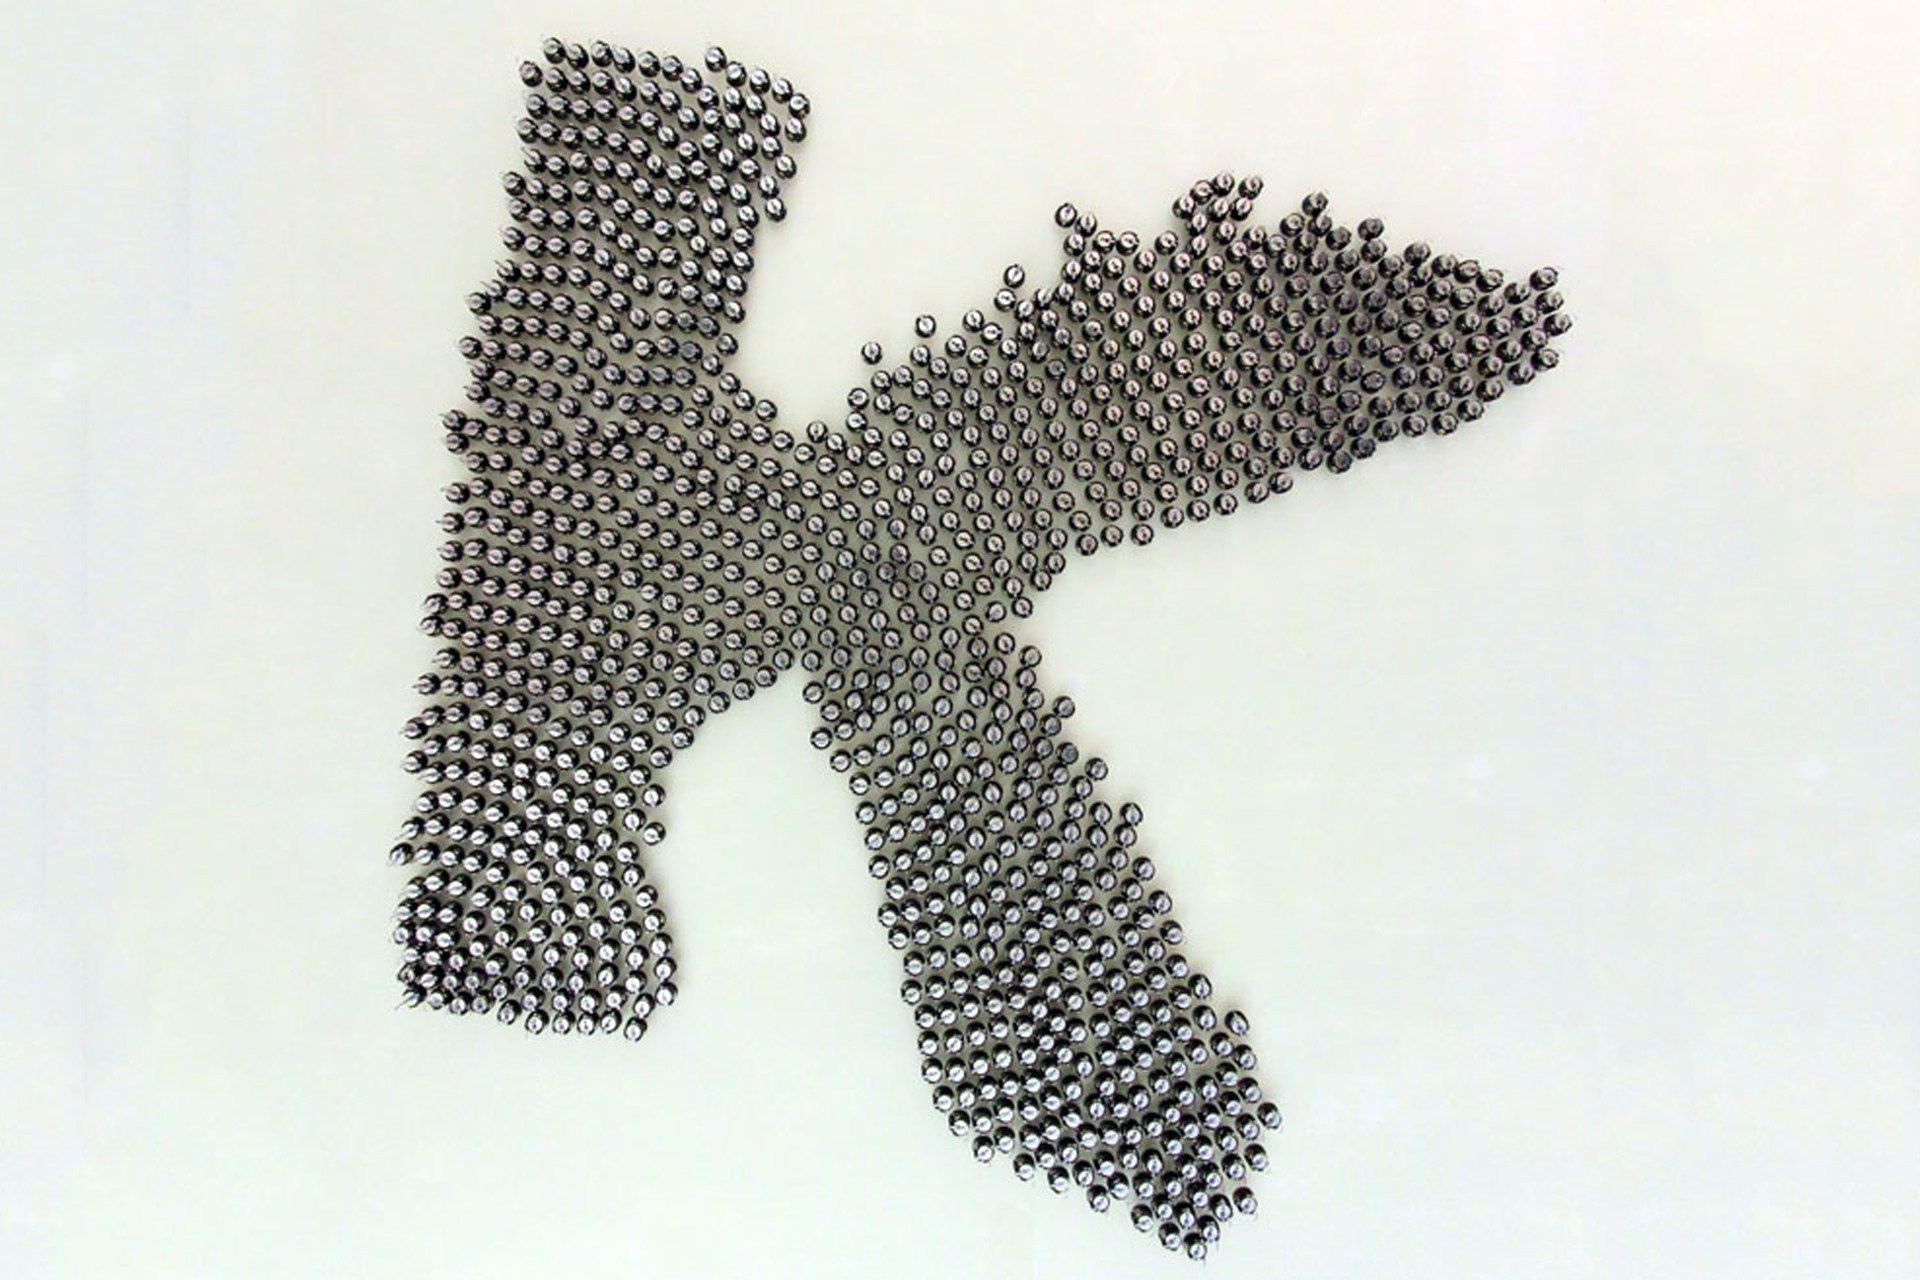 In half a day, the swarm of 1,000 kilobots can self-assemble into a variety of shapes.